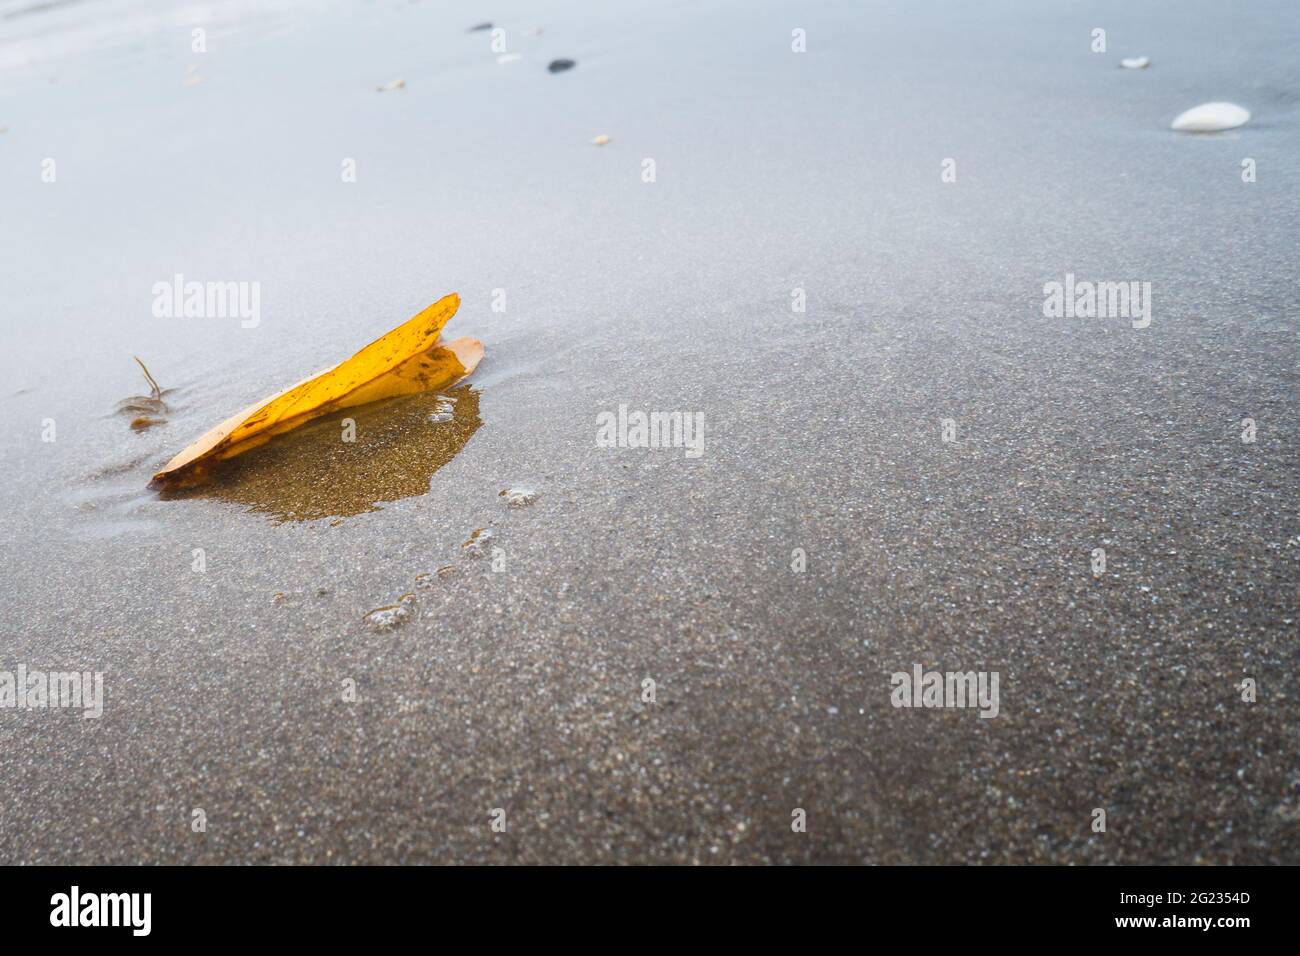 Autumn yellow leaf half buried in the wet sand with reflection at a beach Stock Photo